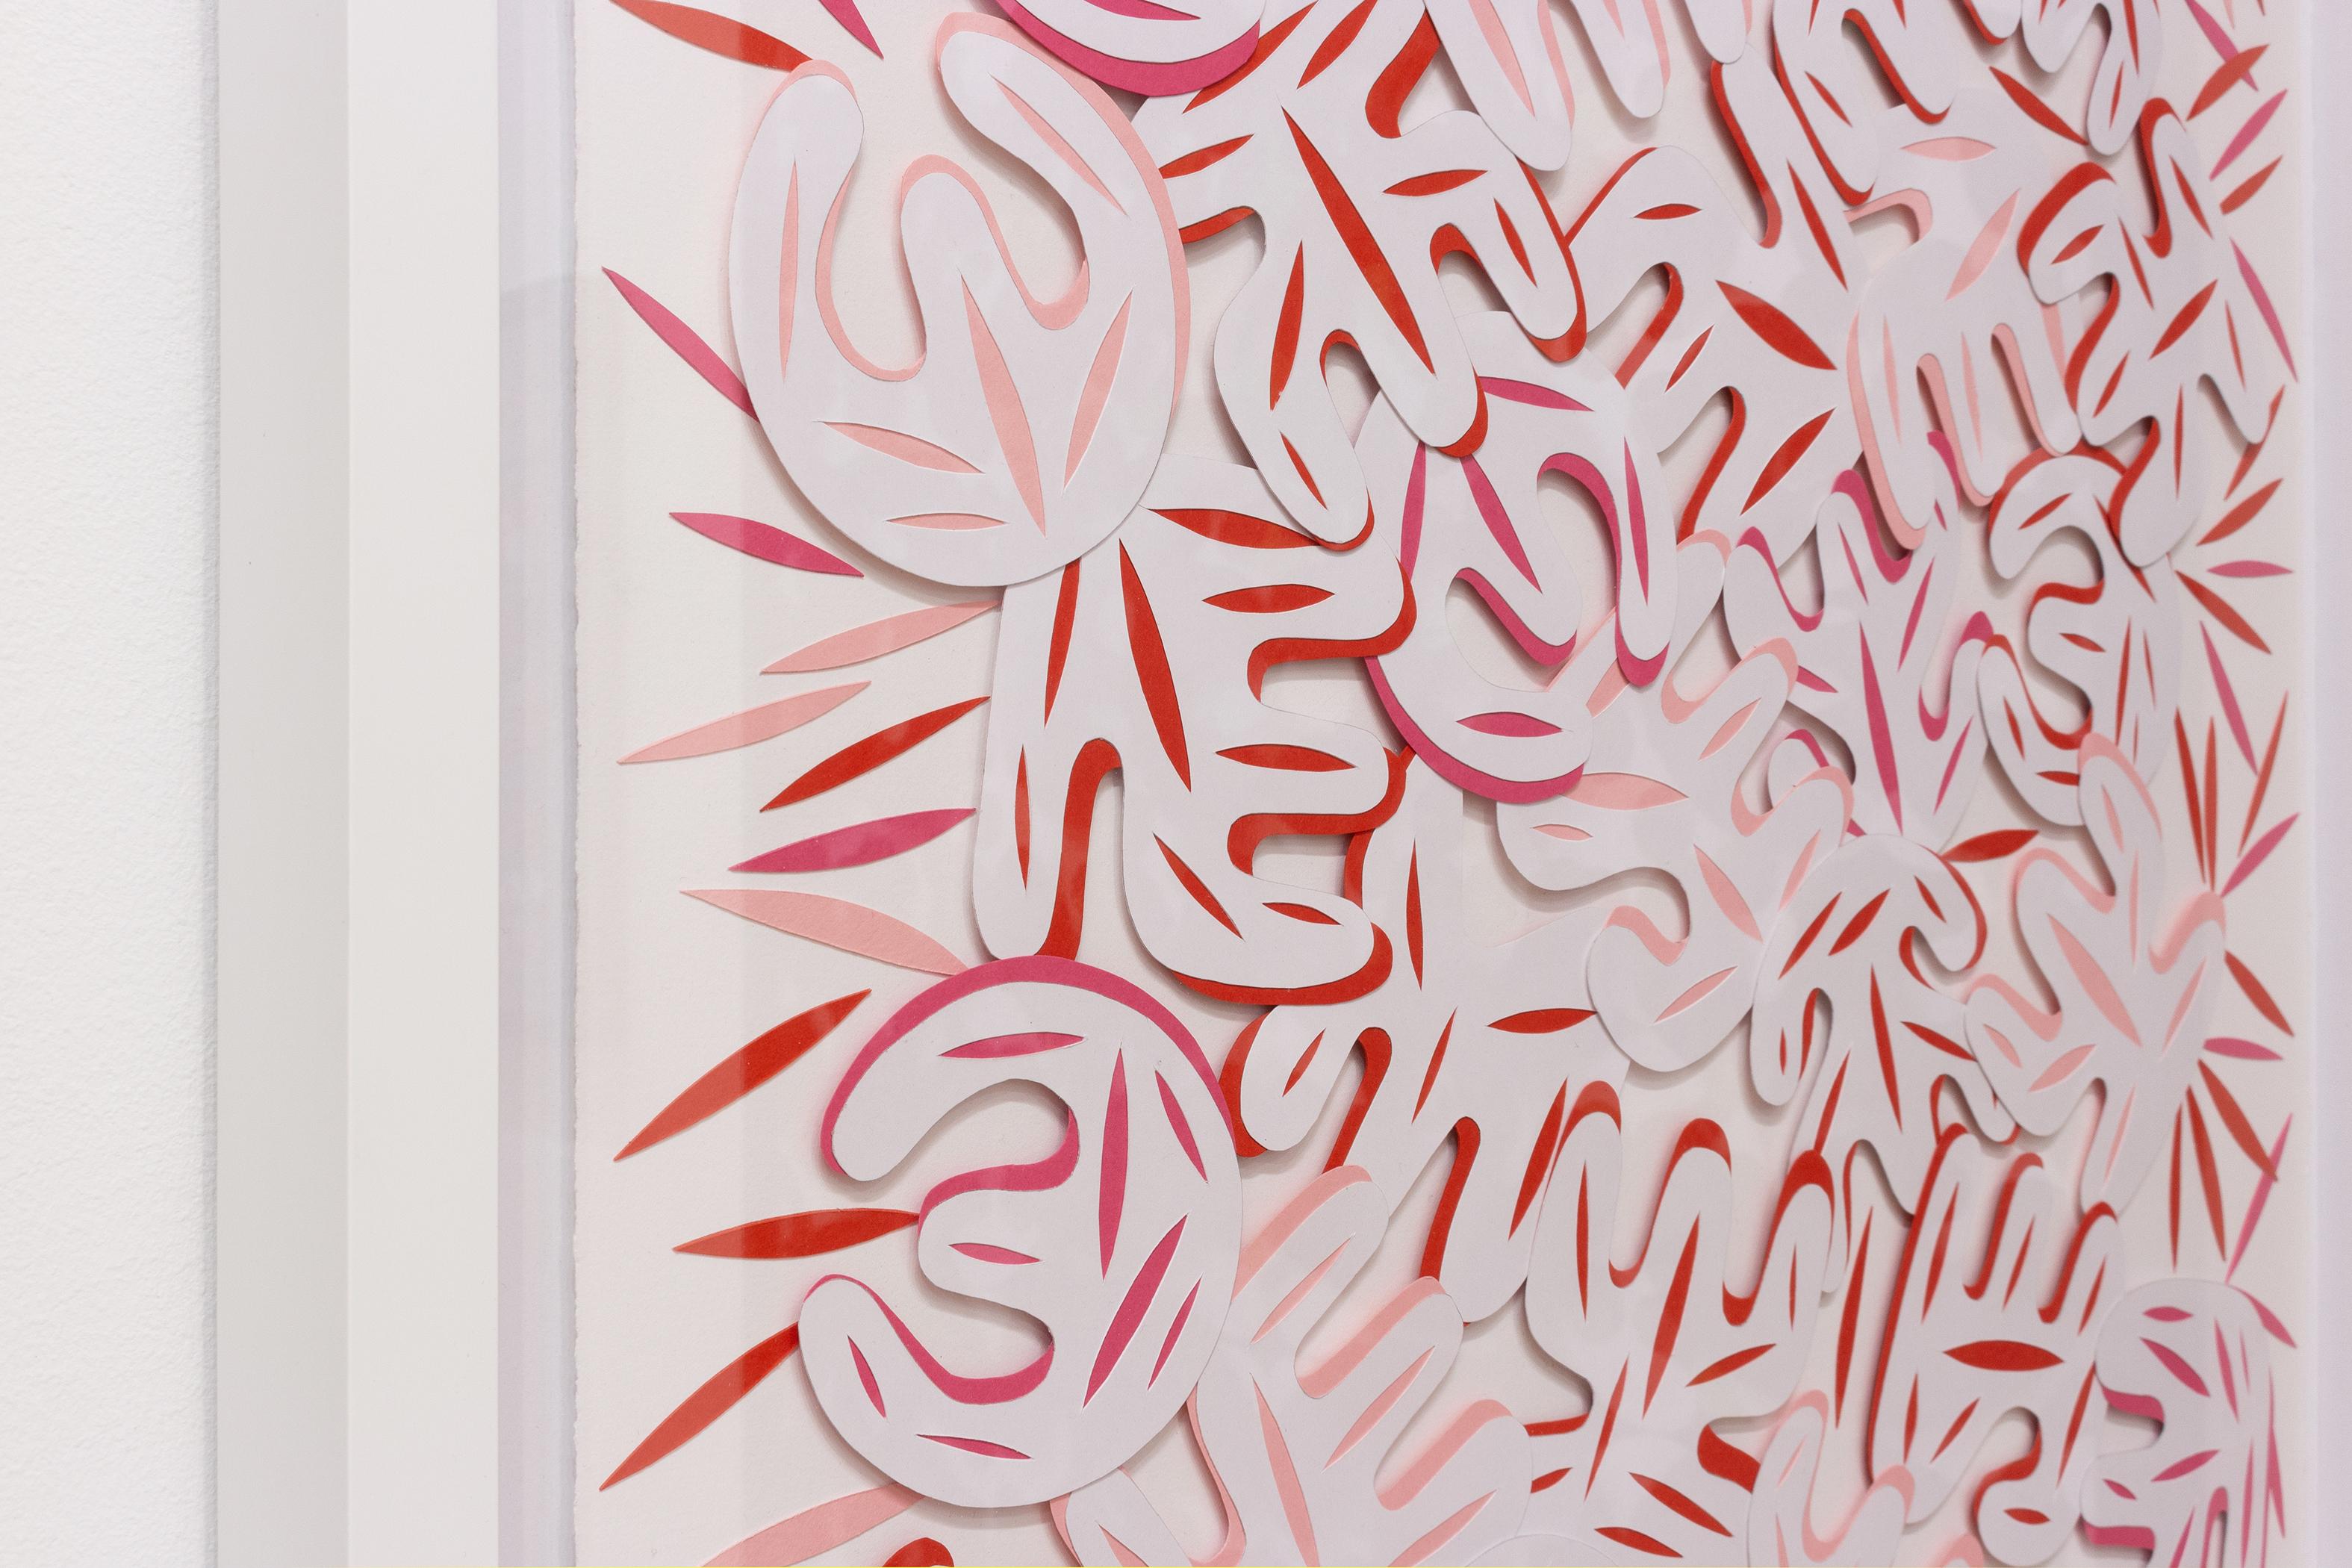 'Kboom' - 3-D collage, abstract, white and red, modern, minimal - Sculpture by Esteban Patino